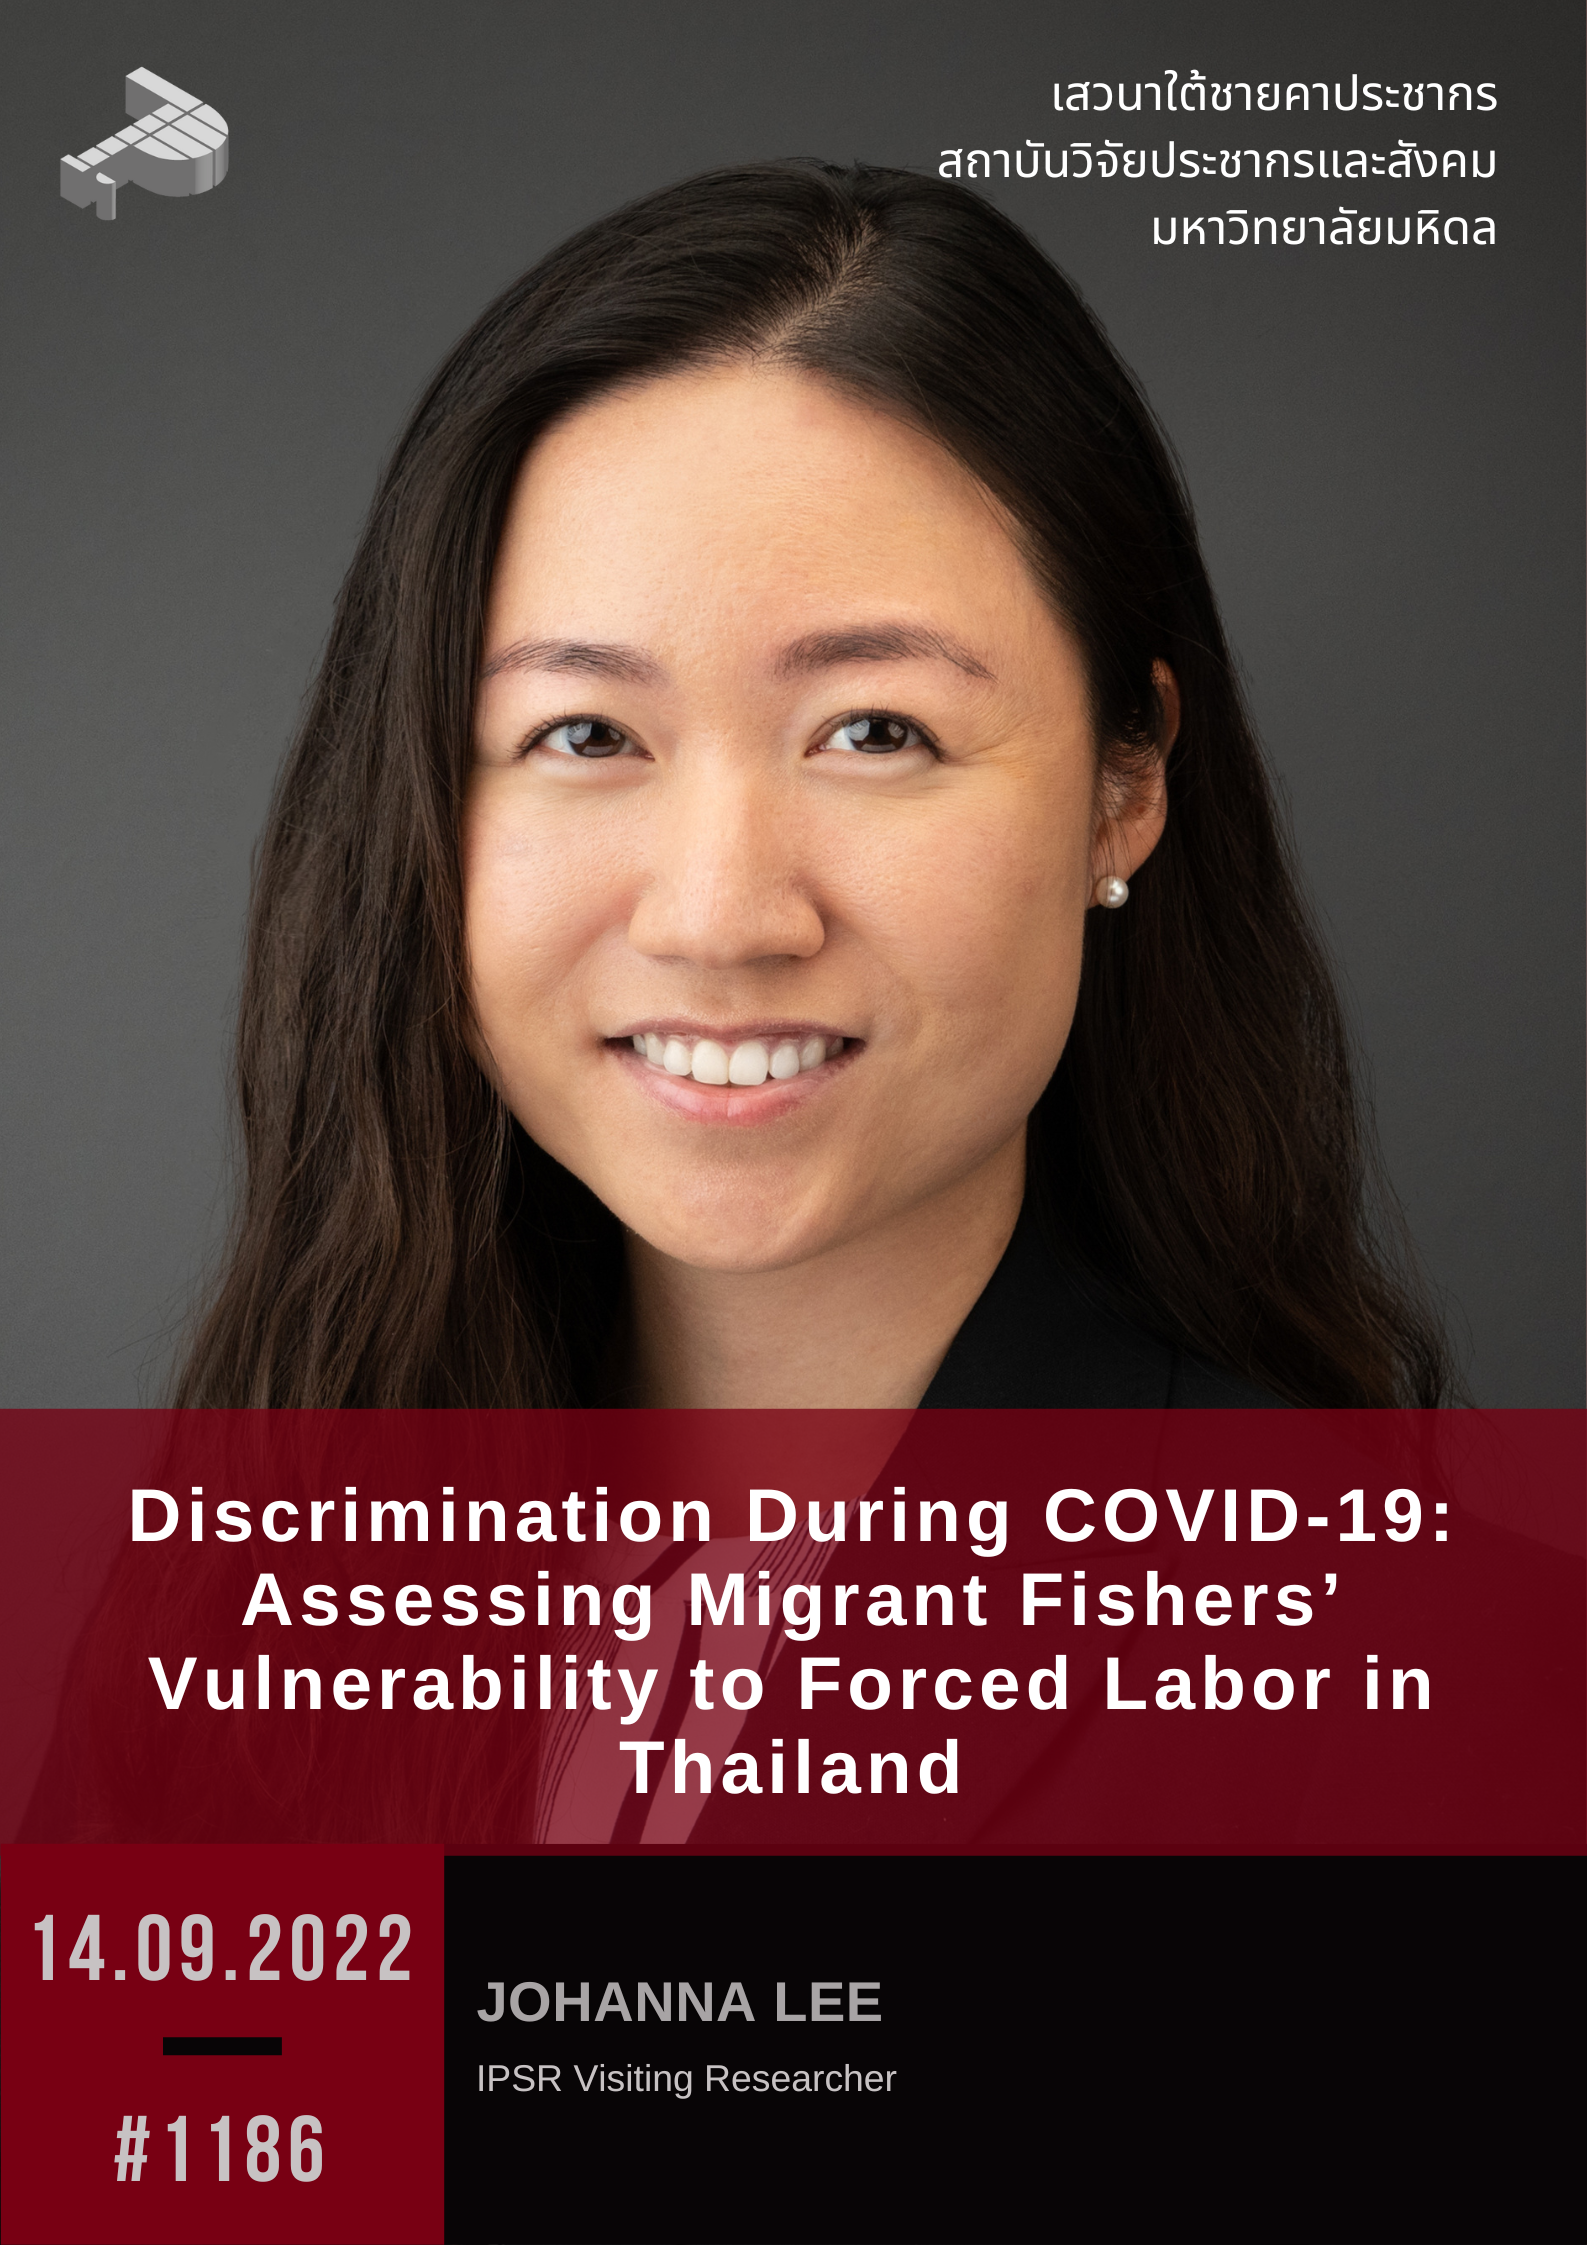 Discrimination During COVID-19: Assessing Migrant Fishers’ Vulnerability to Forced Labor in Thailand